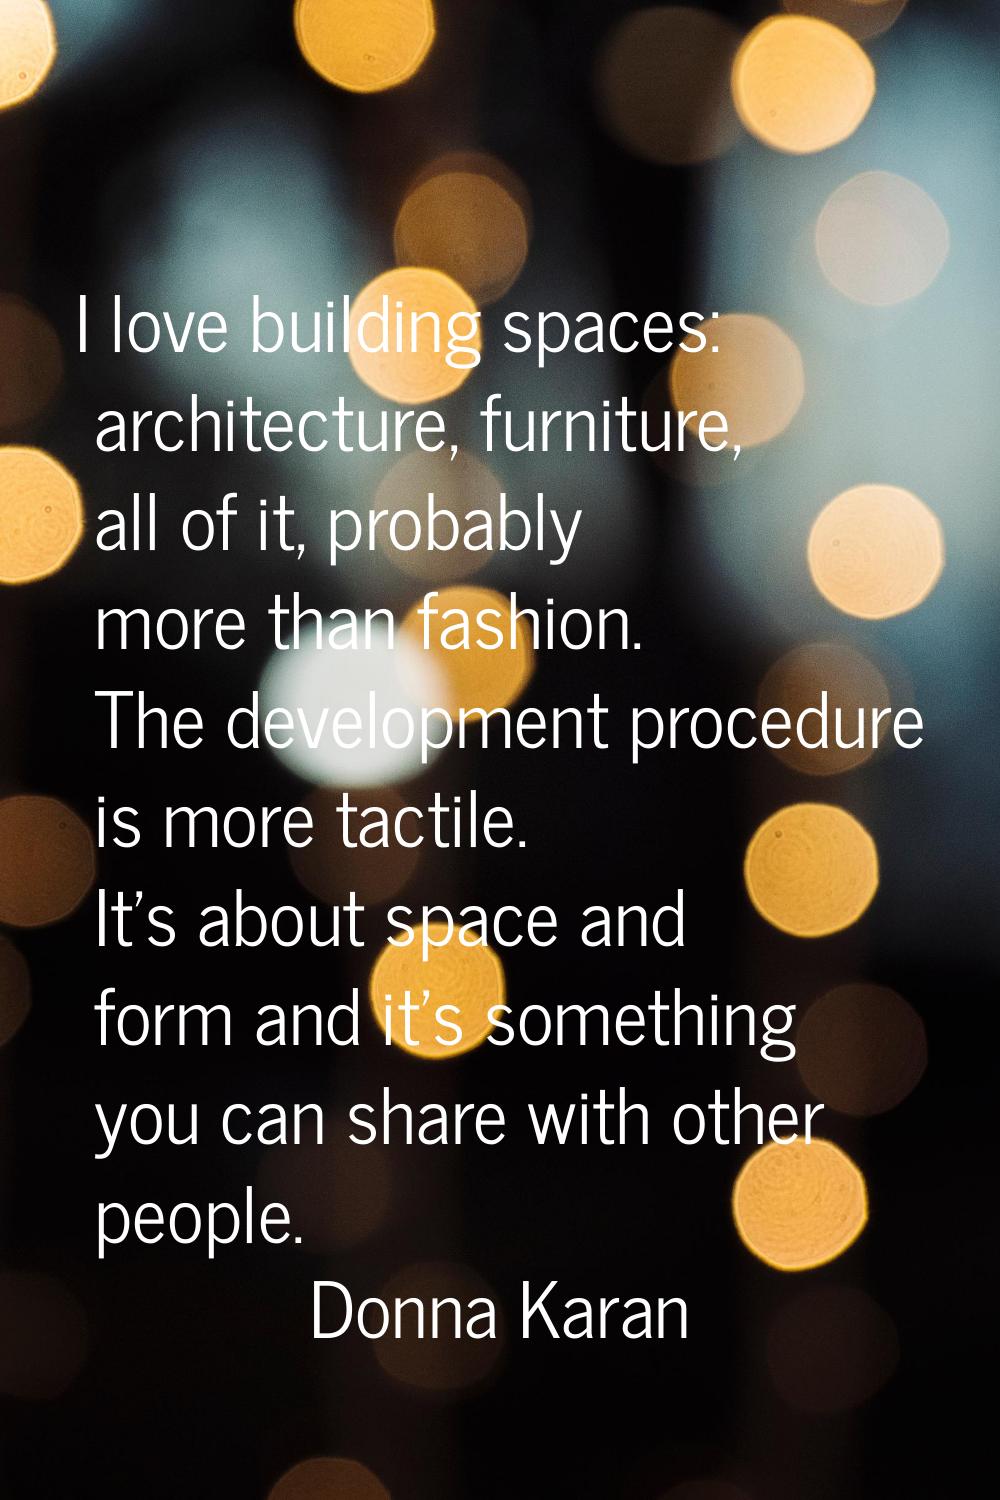 I love building spaces: architecture, furniture, all of it, probably more than fashion. The develop